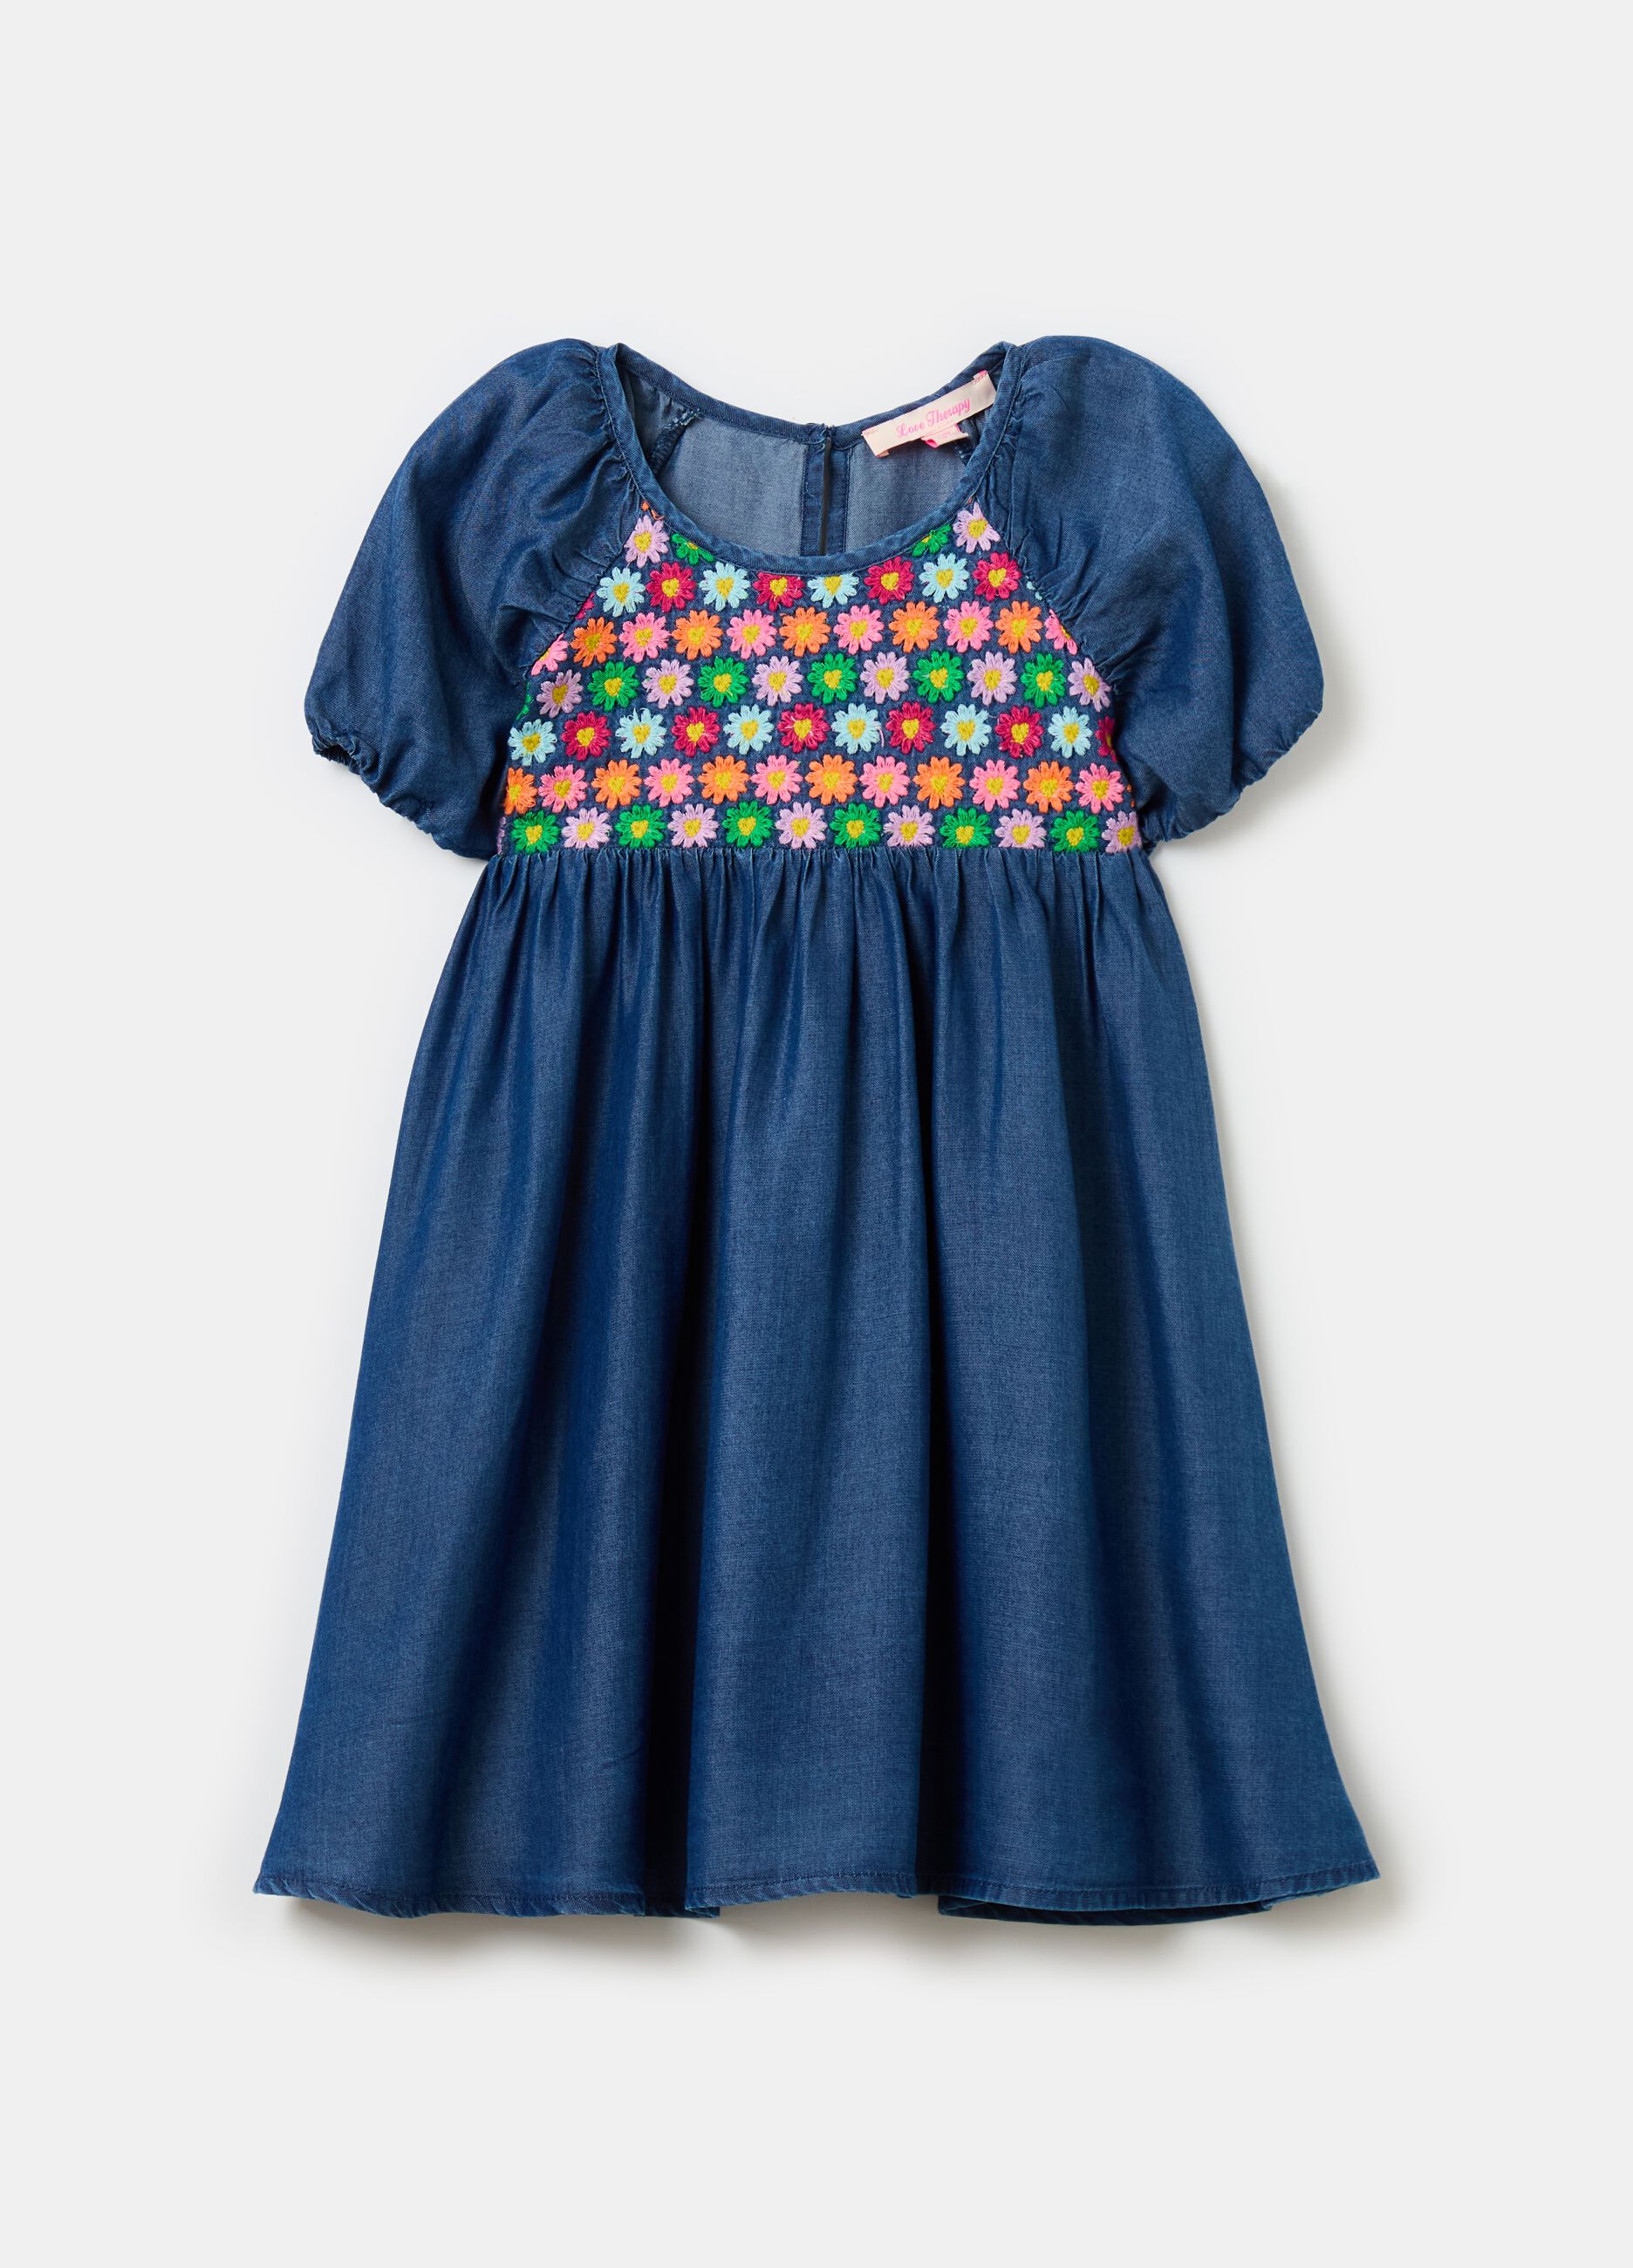 Denim-effect dress with flowers embroidery